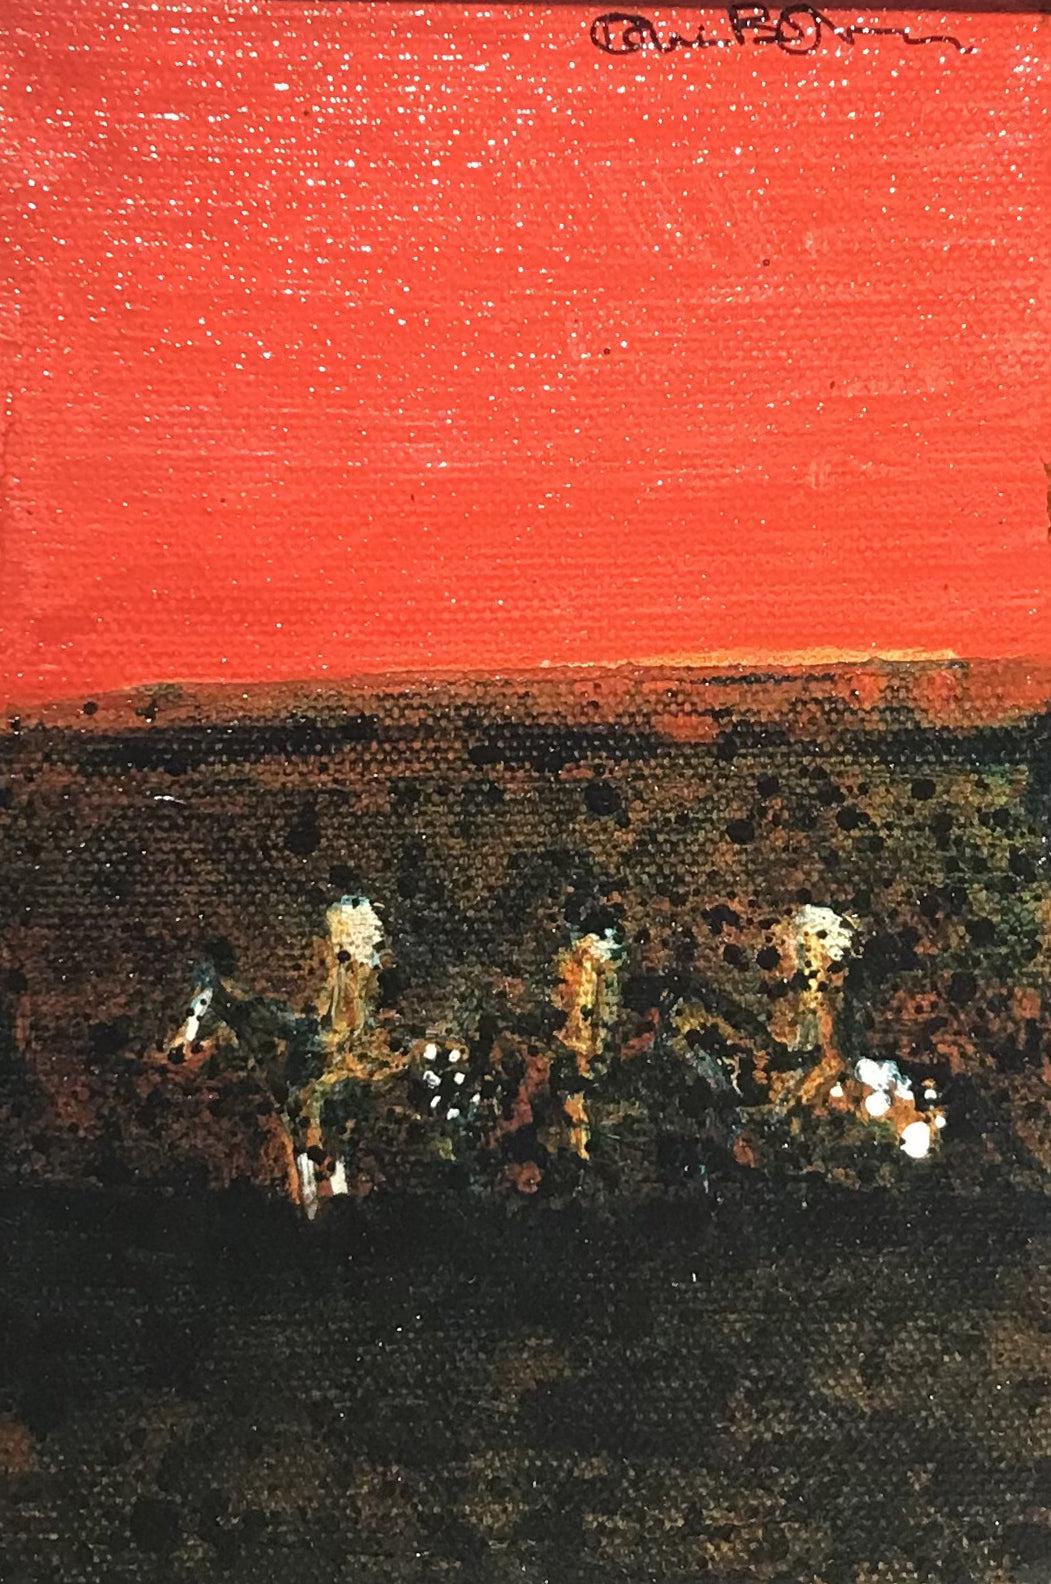 Evening Riders-Painting-Kevin Red Star-Sorrel Sky Gallery